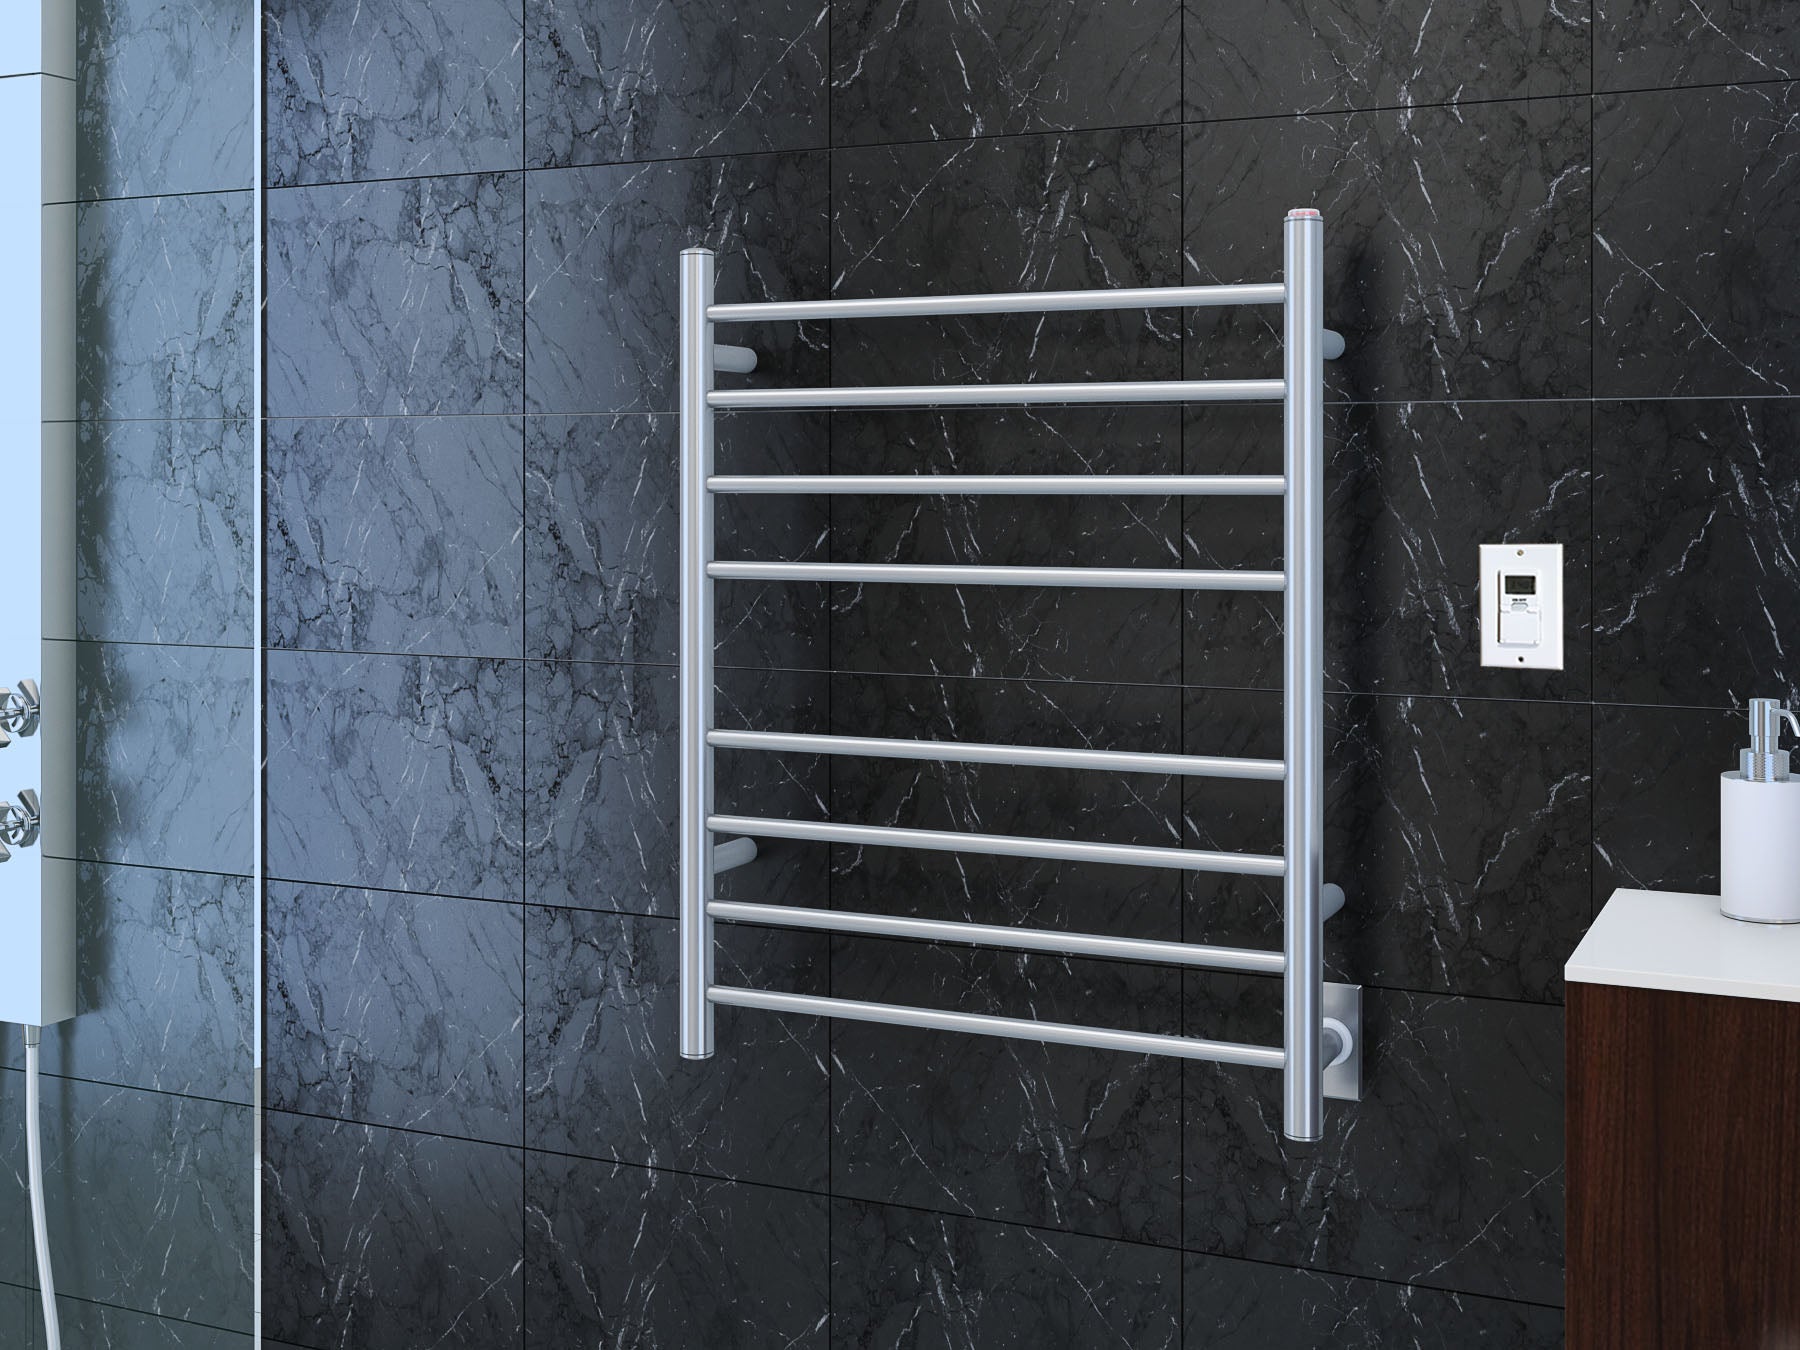 Prestige Dual 8-Bar Hardwired and Plug-in Towel Warmer in Polished Stainless Steel with Timer